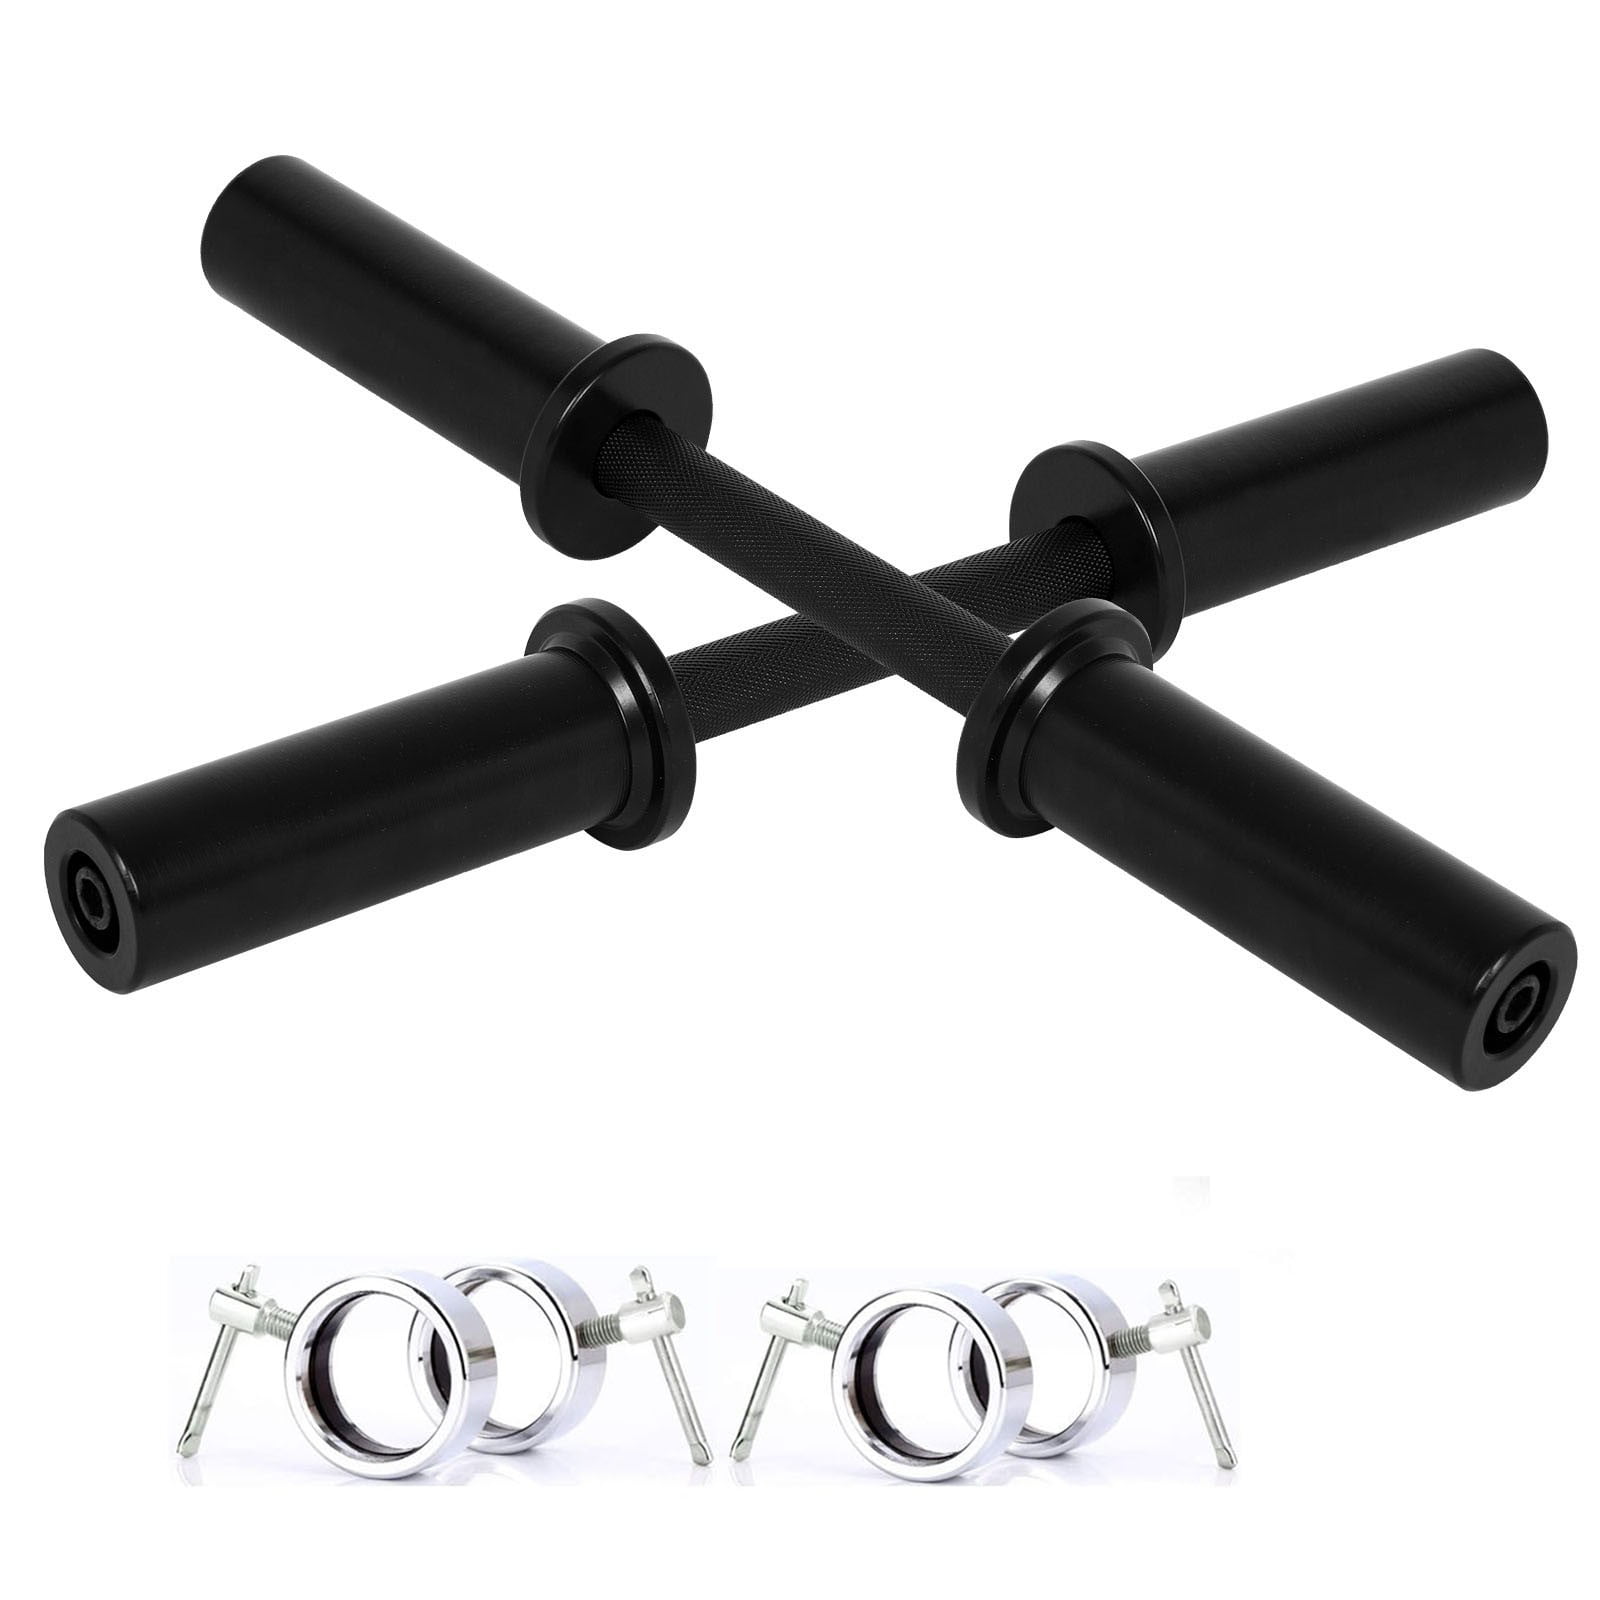 Threaded Handle Weights Set of 2 with Collars Gym Accessories UBOWAY Adjustable Dumbbell Bars 2 inch